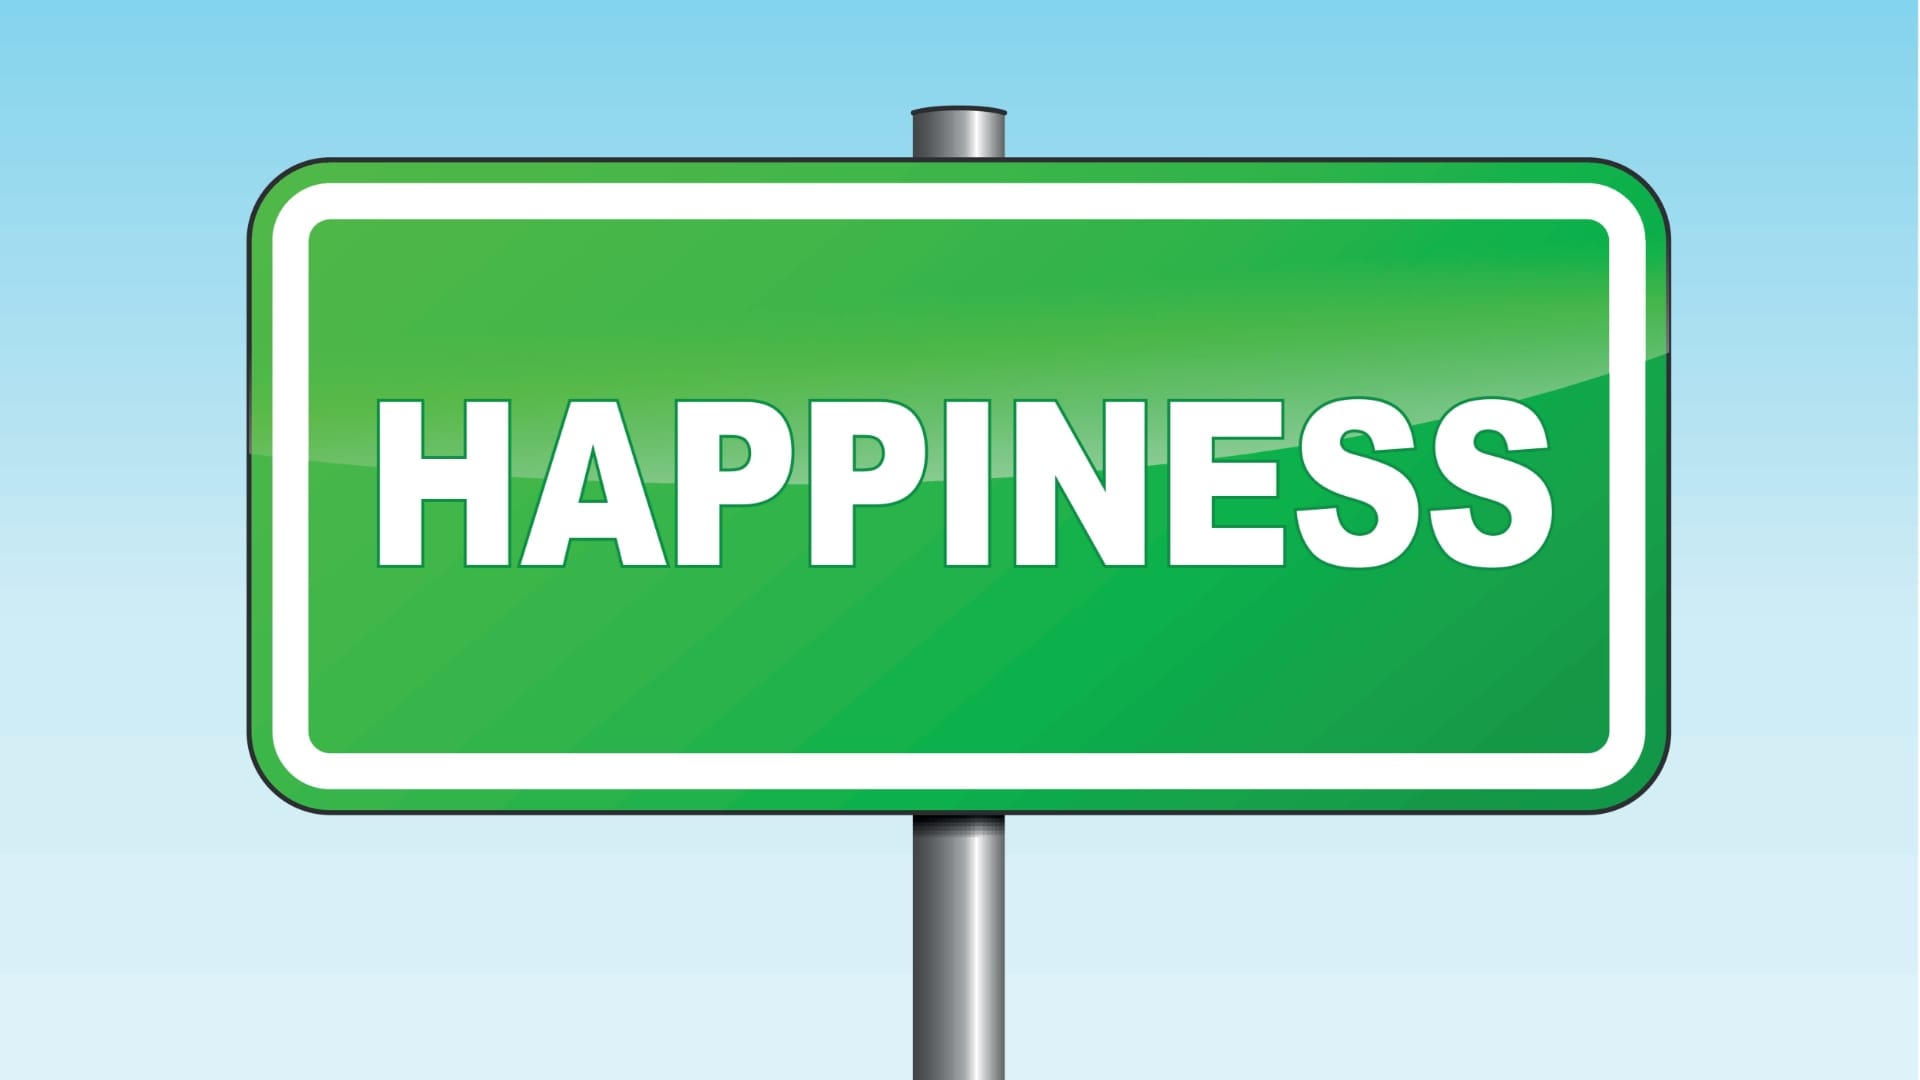 What Makes You Happy? (Genesis 29:15-35)